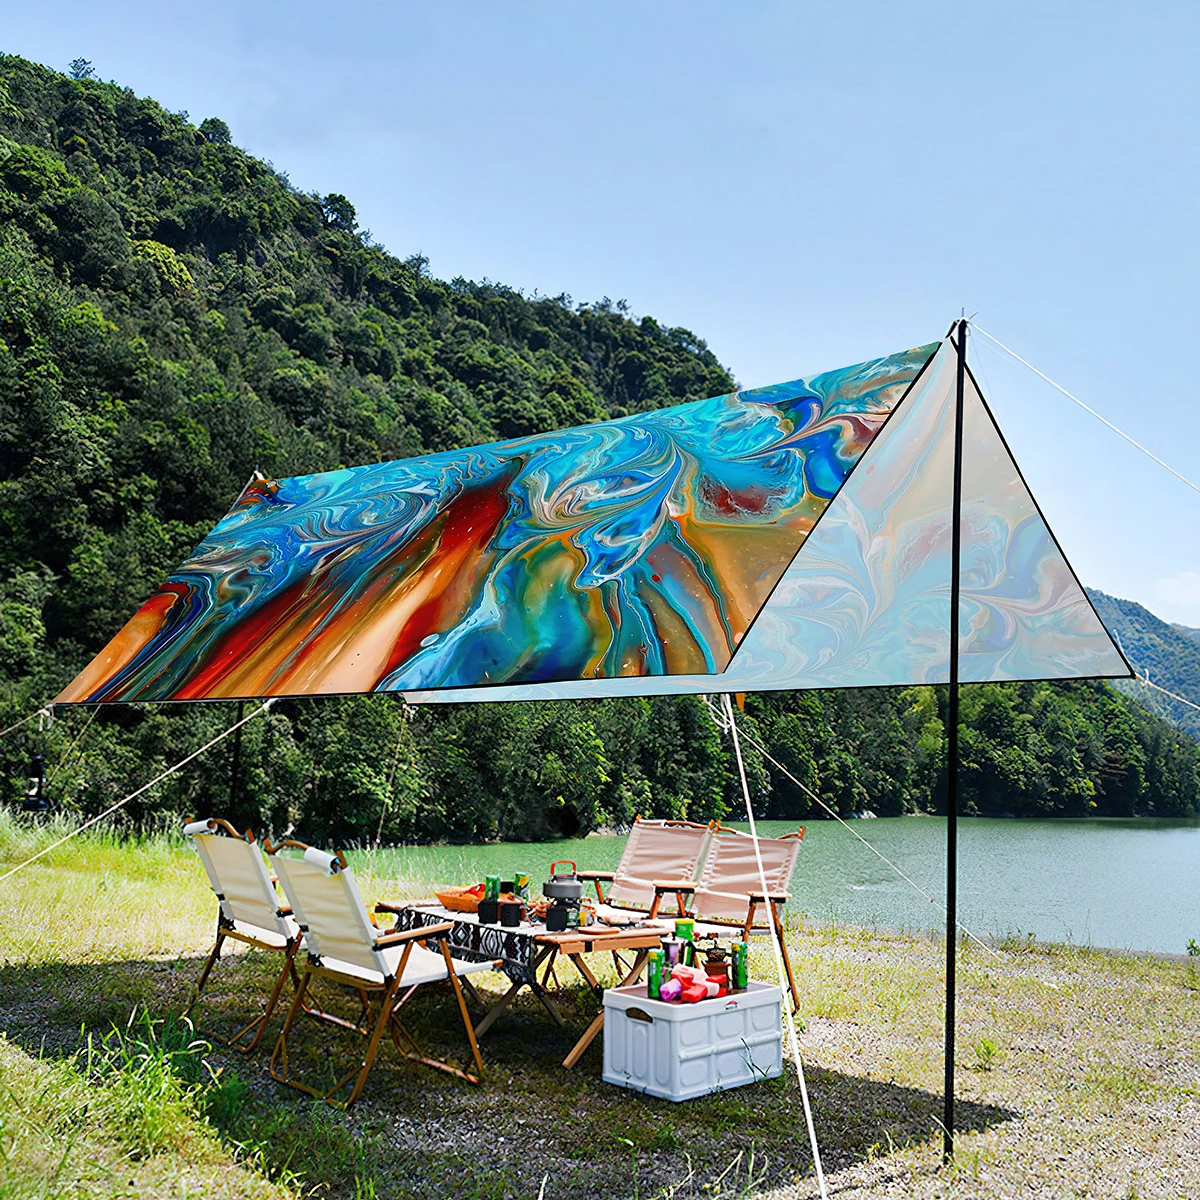 

Color Marbling Waterproof UV-resistant Shade Canopy,Portable and Lightweight Oxford Machine Washable Tent For Travelling Beach